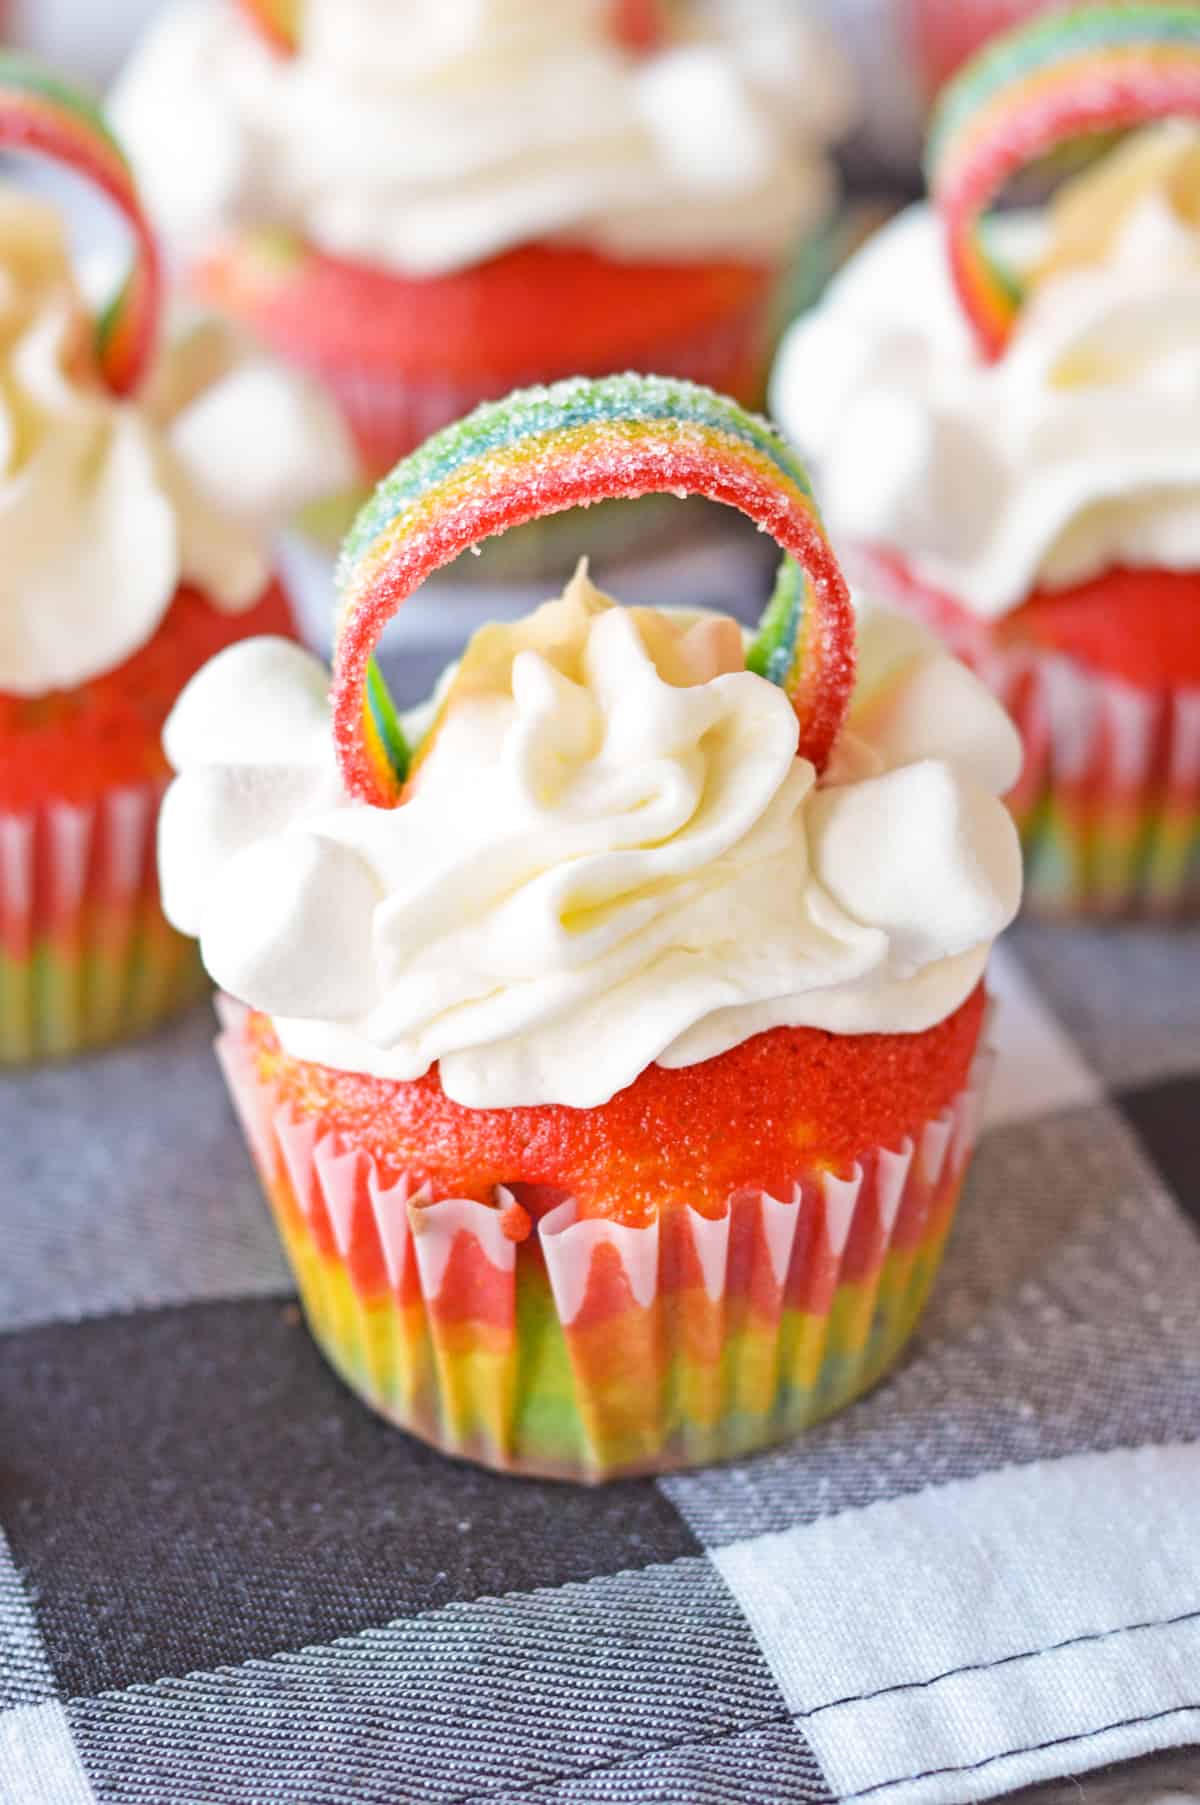 Cute Rainbow Cupcake with vanilla frosting piped on and rainbow airhead candy making an arch across the top.